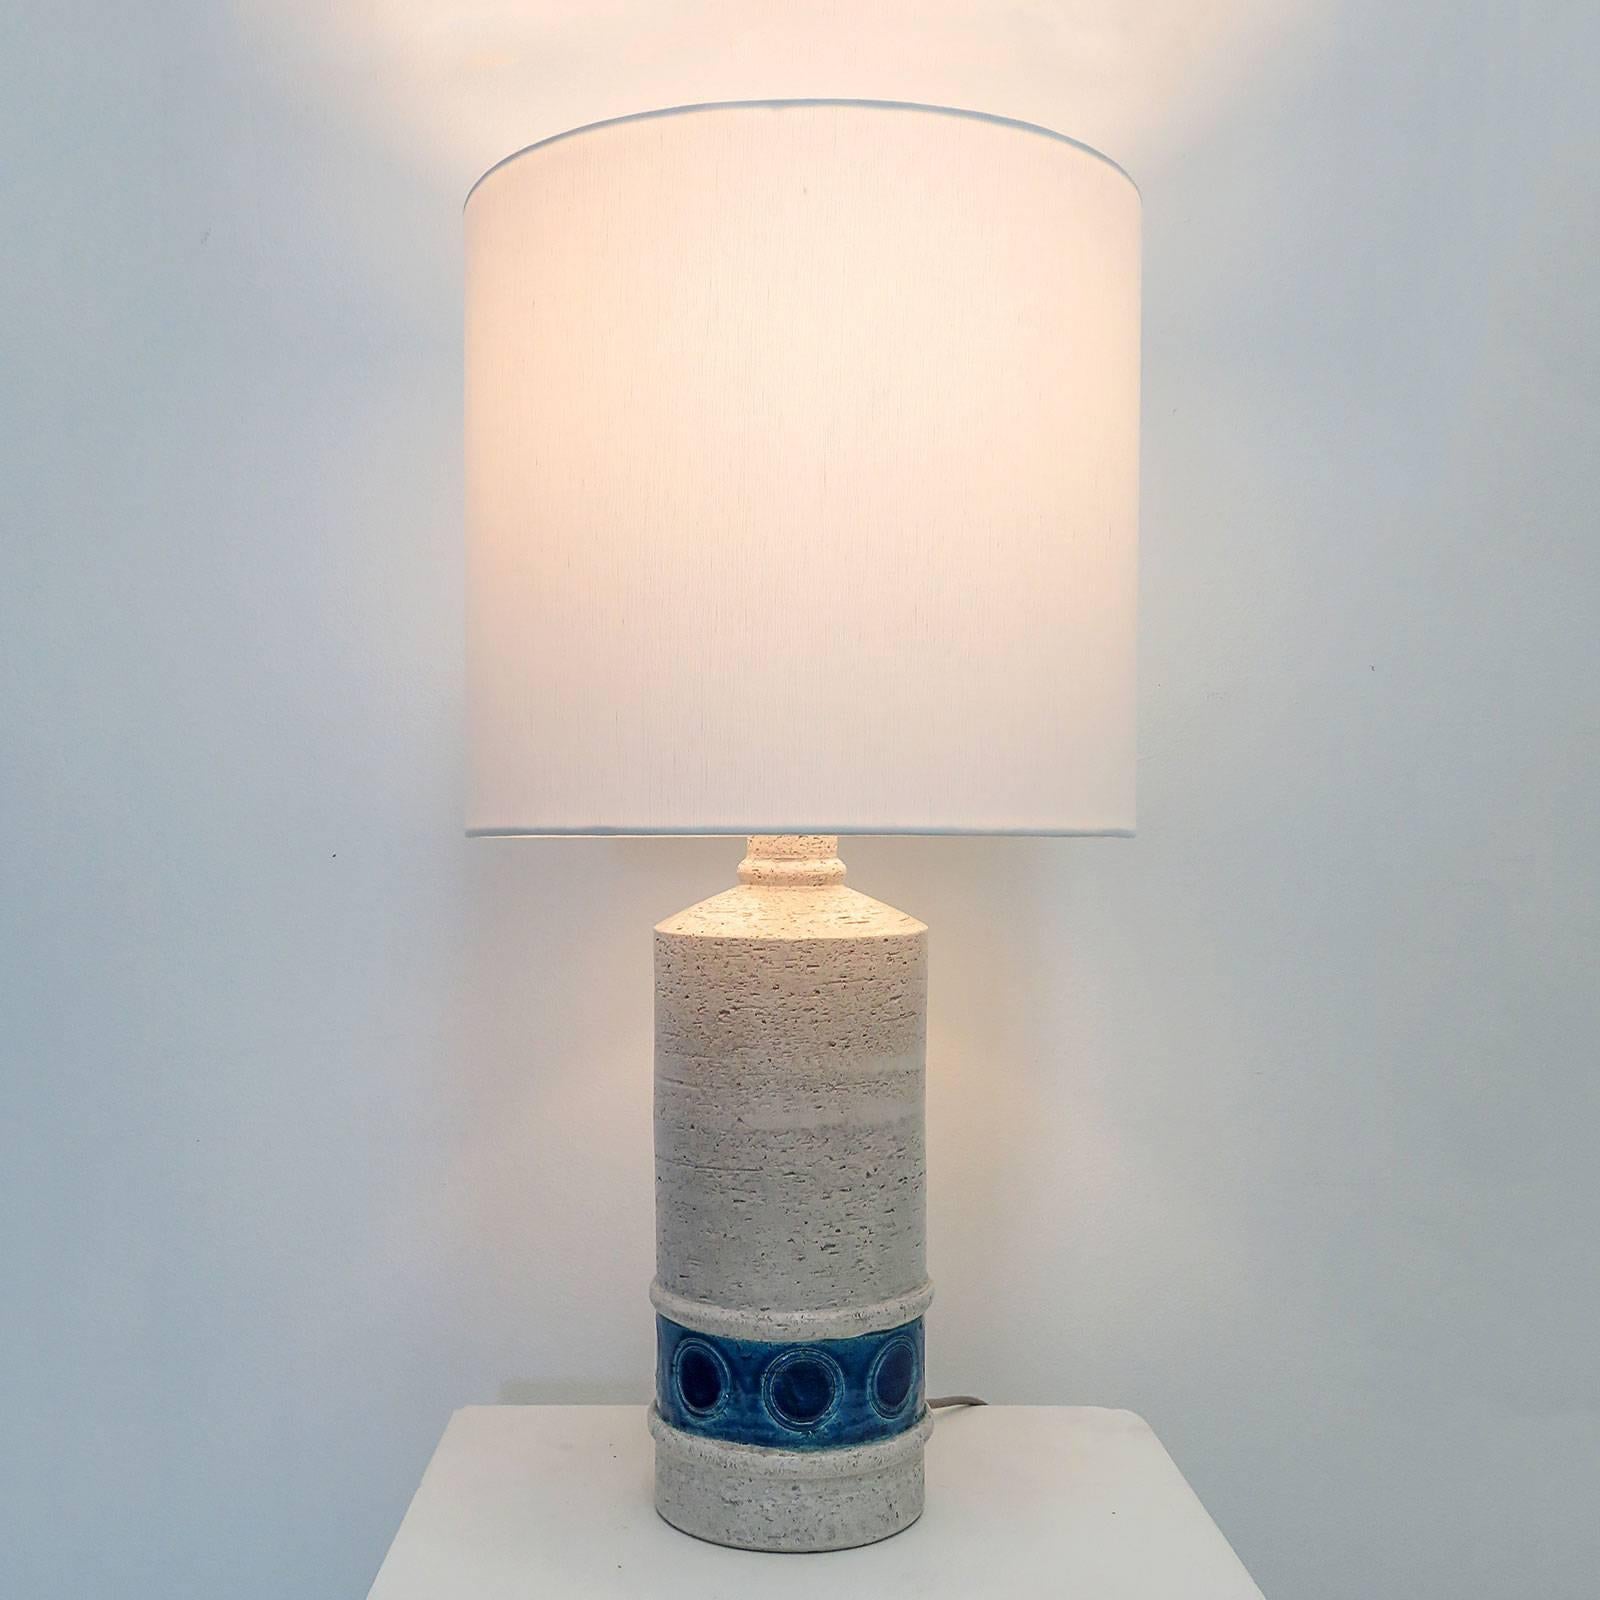 Wonderful pair of glazed ceramic table lamps in a textured, off-white color with a lower band of light and dark blues highlighting incised geometric decorations. Designed by Aldo Londi for the collection 